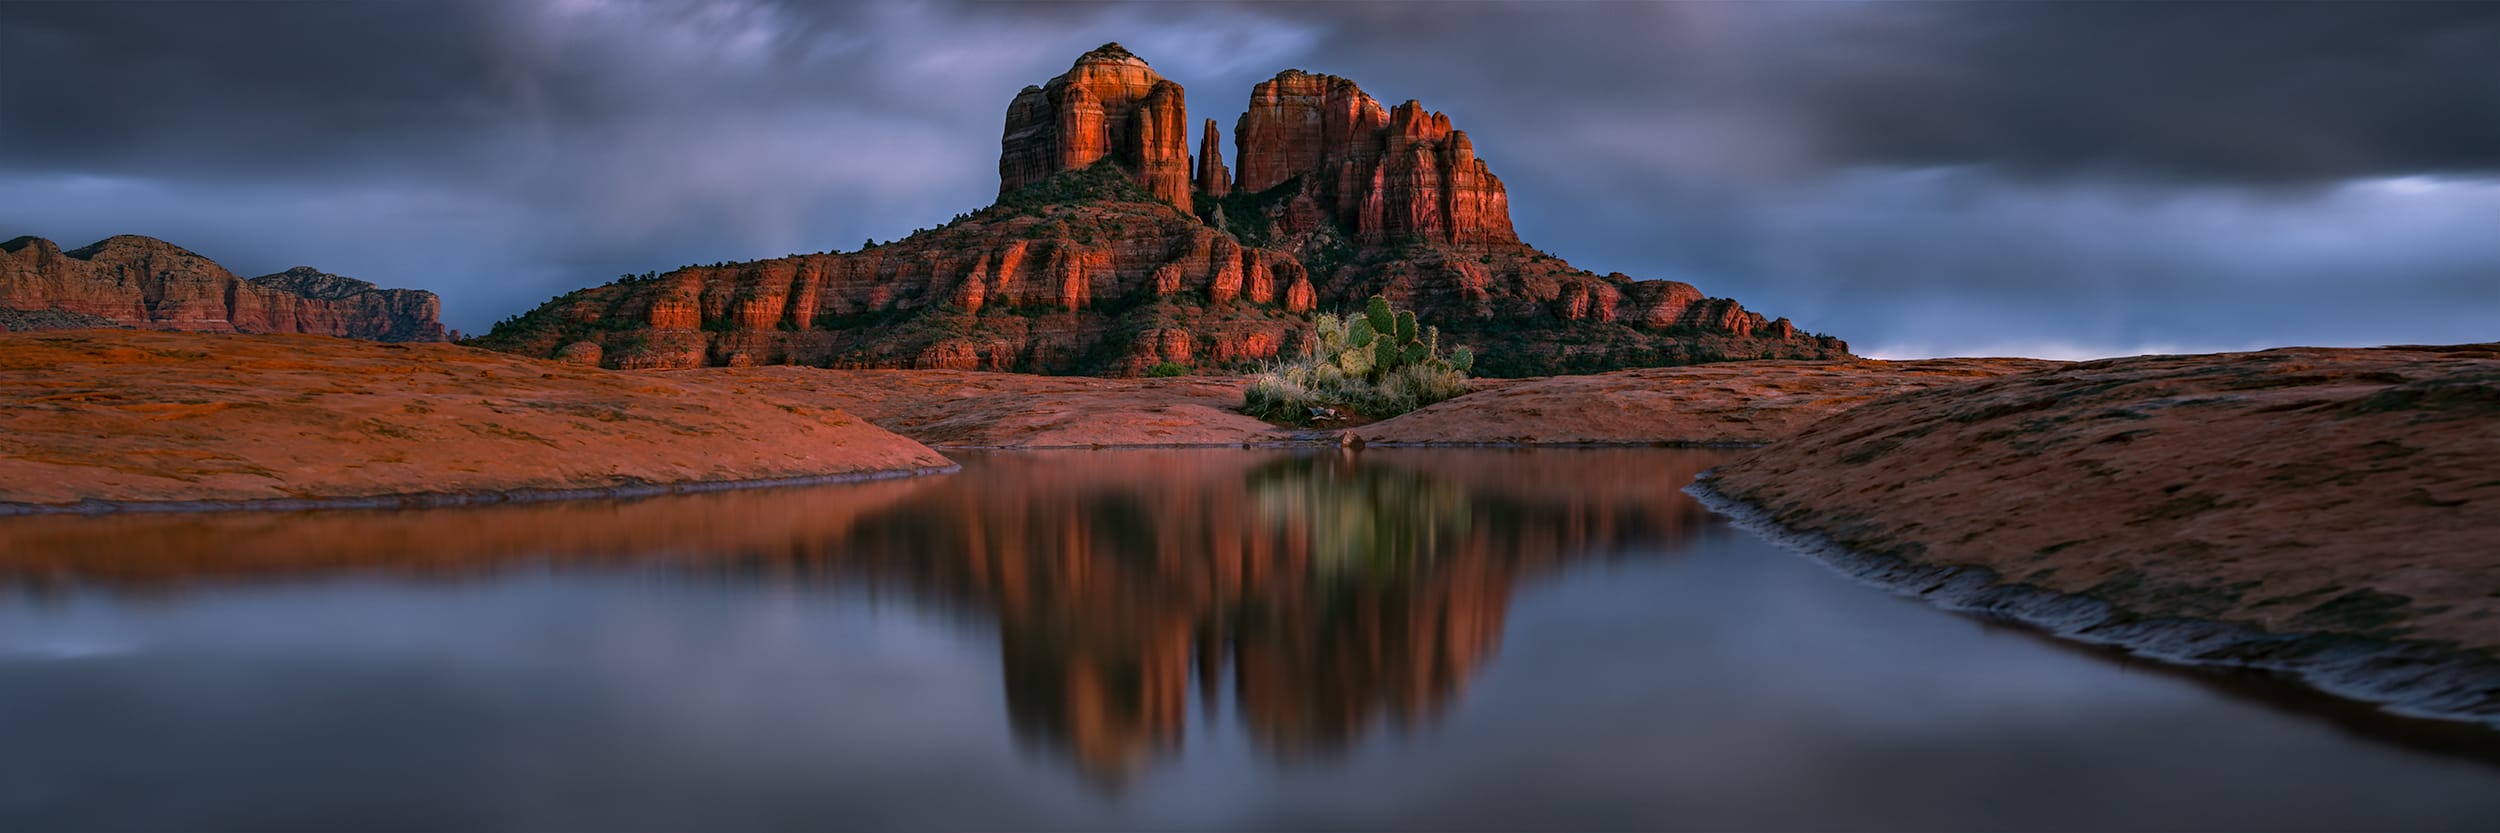 Lightbox: Cathedral Rock